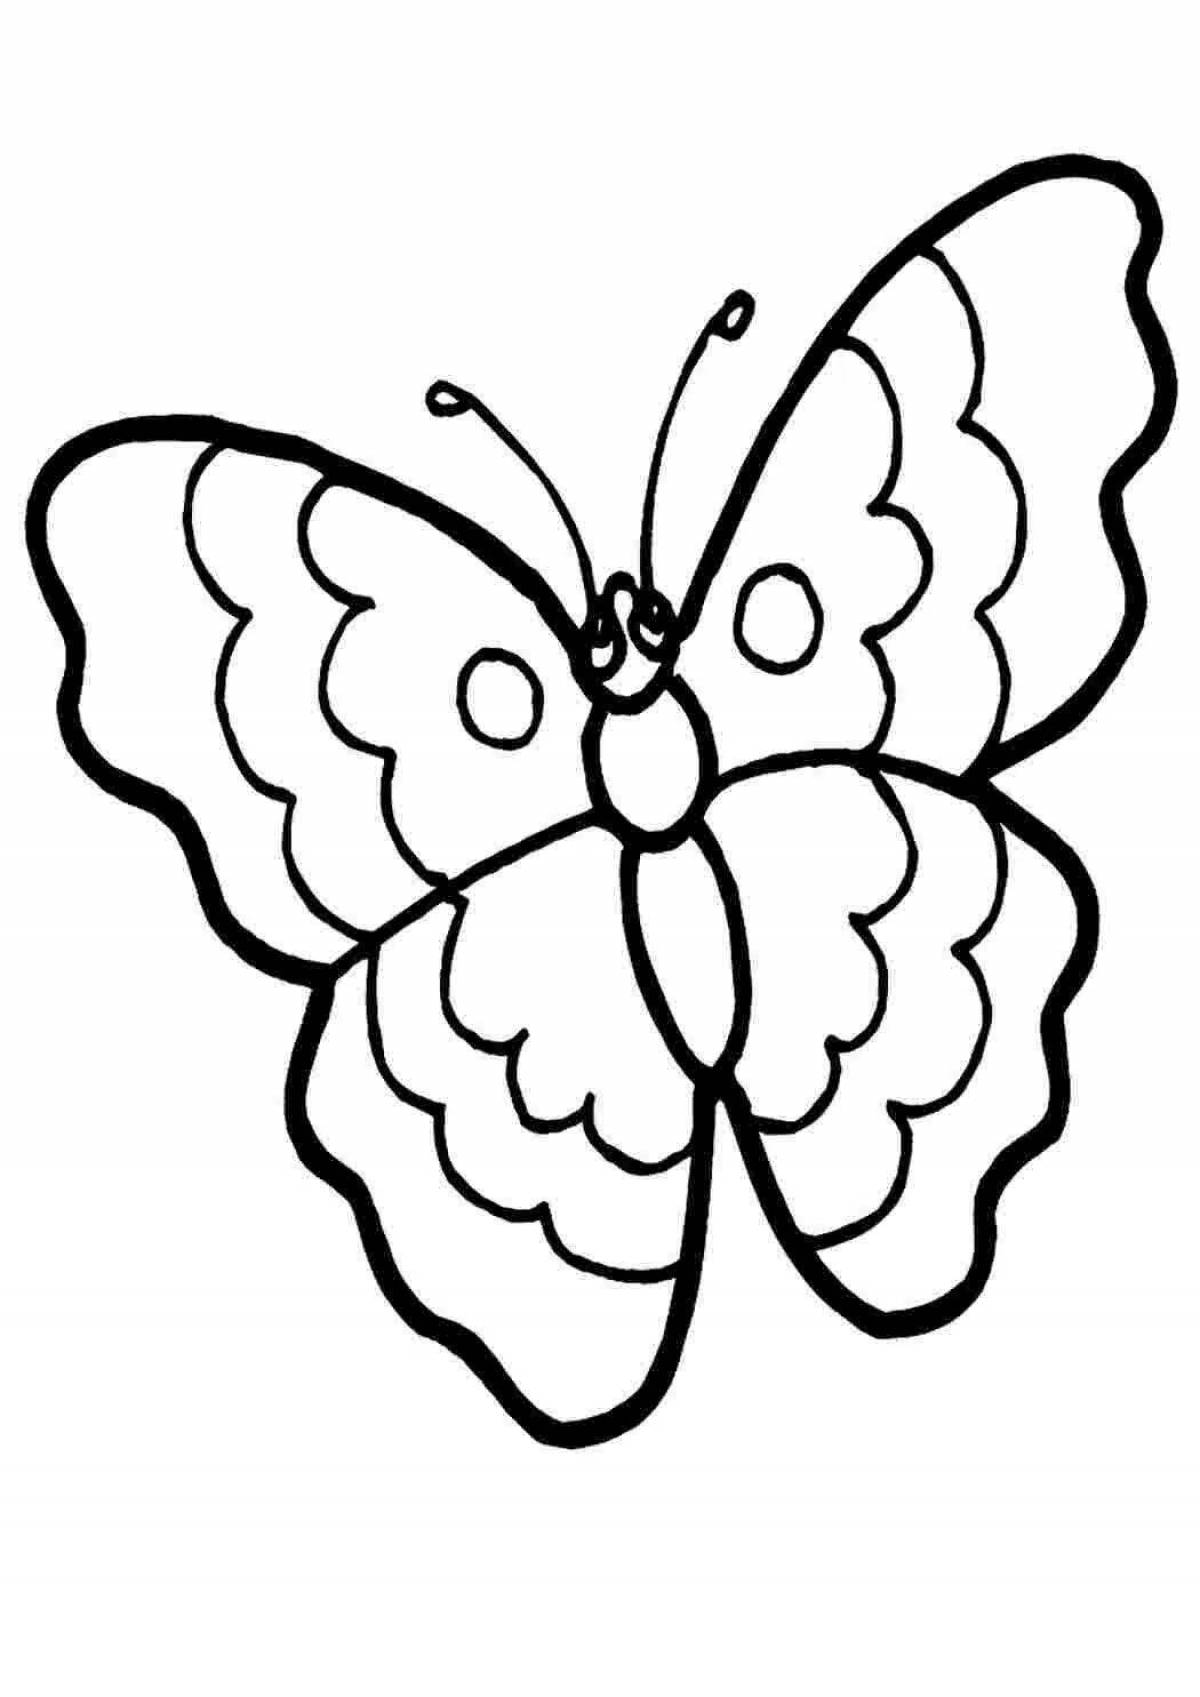 Animated butterfly coloring page for kids